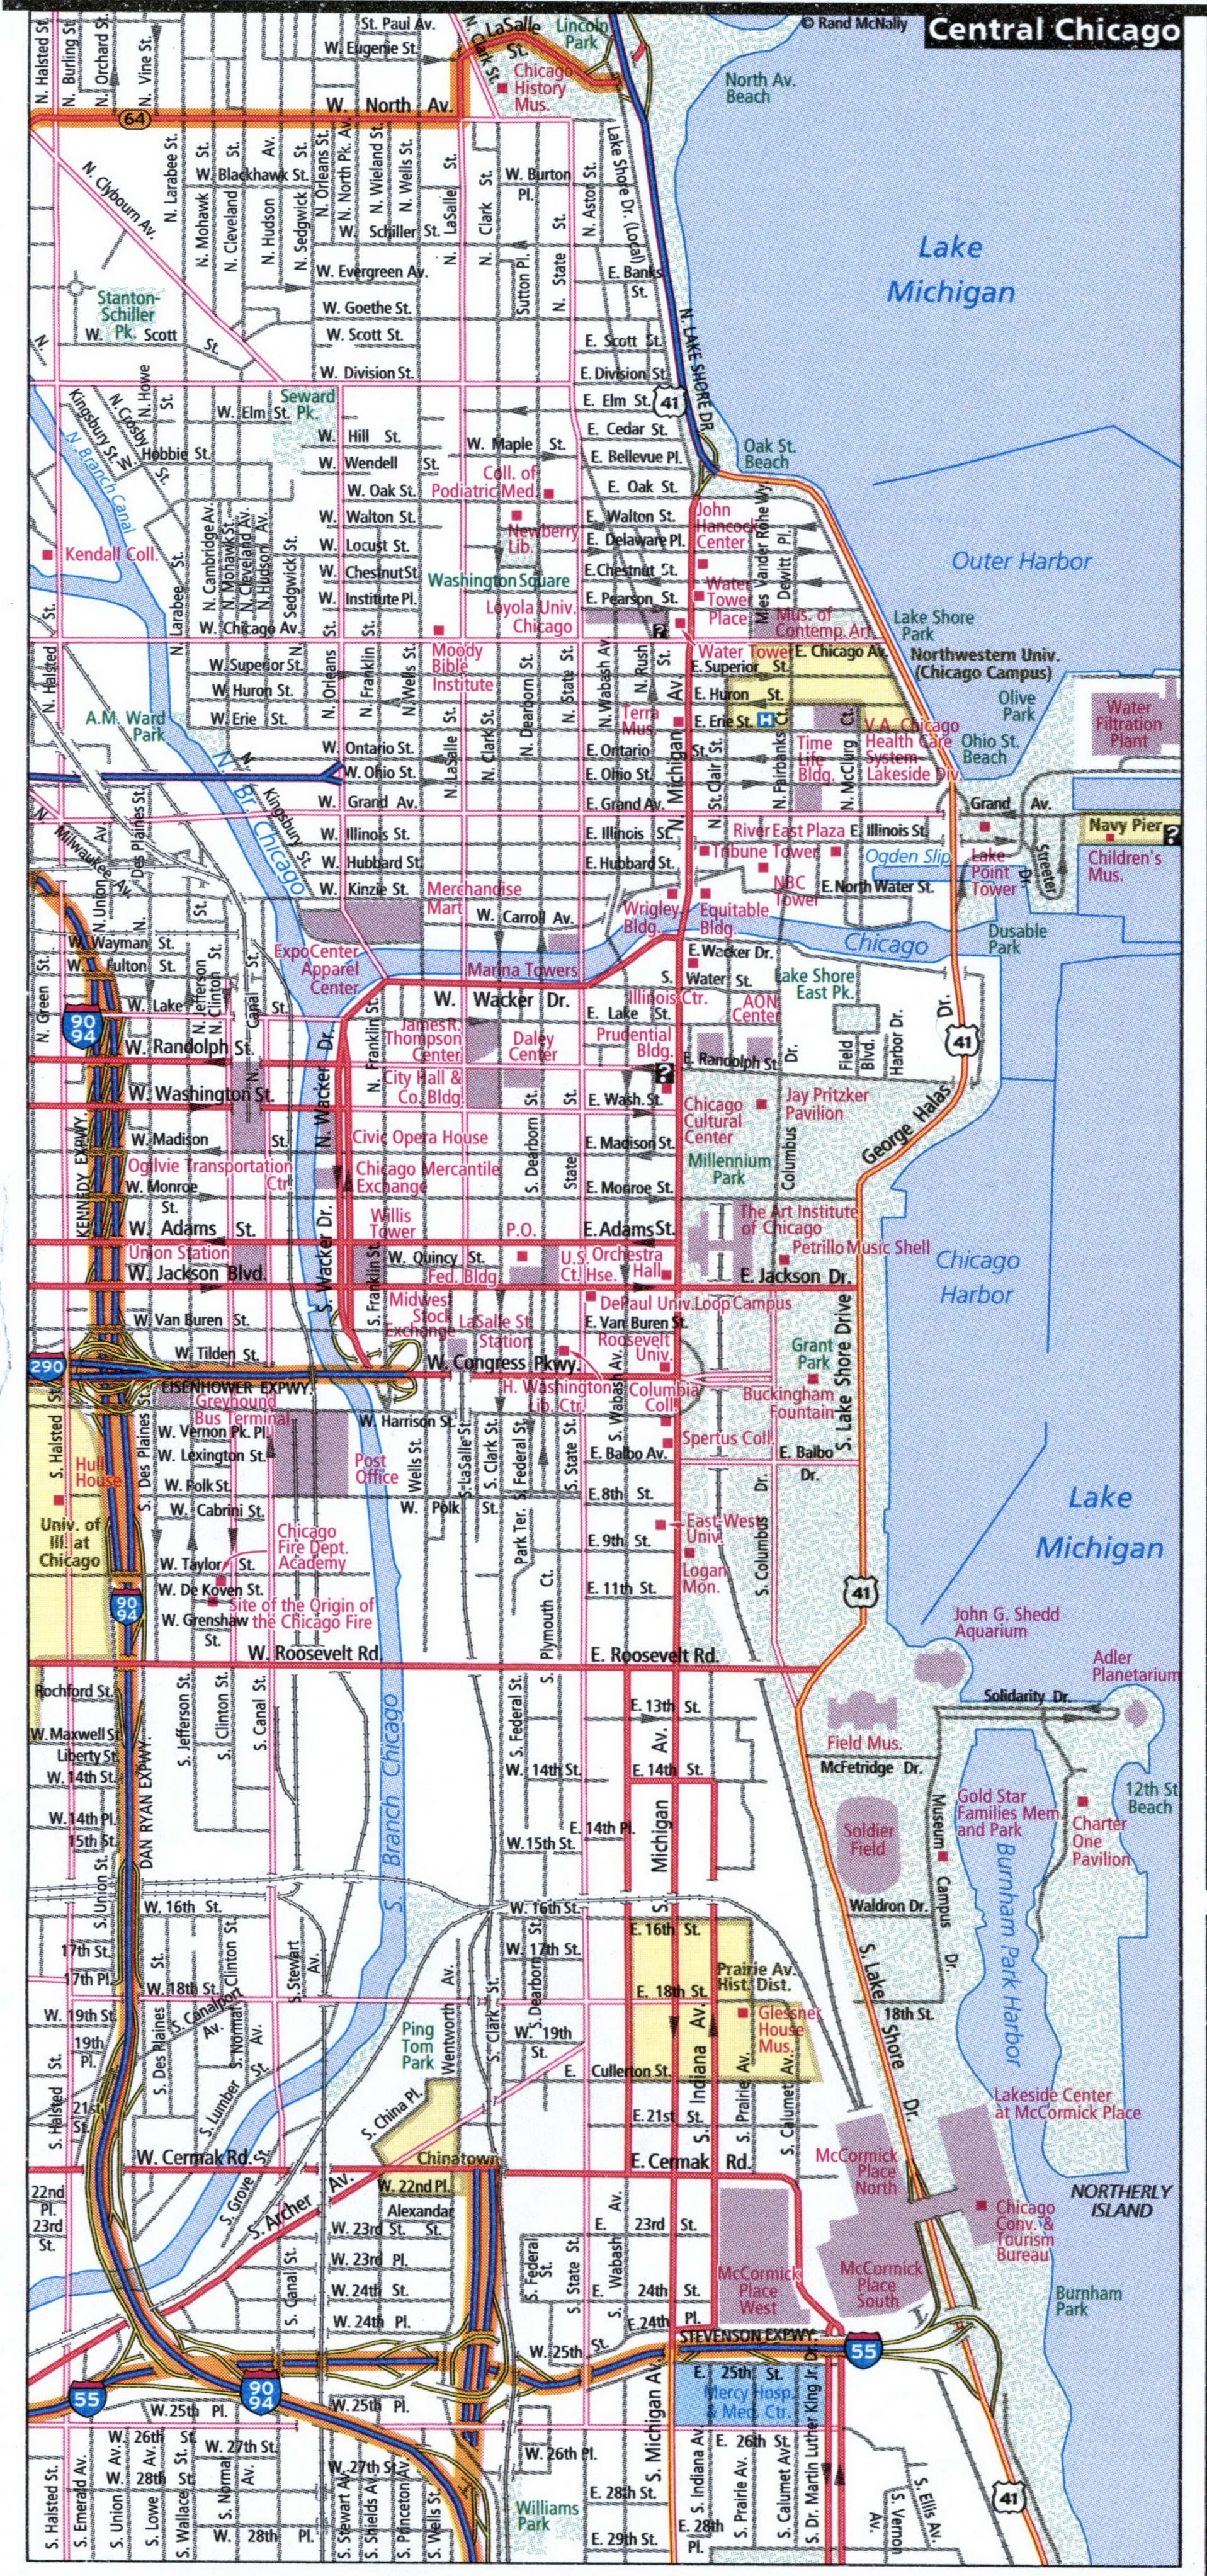 Central Chicago map for truckers